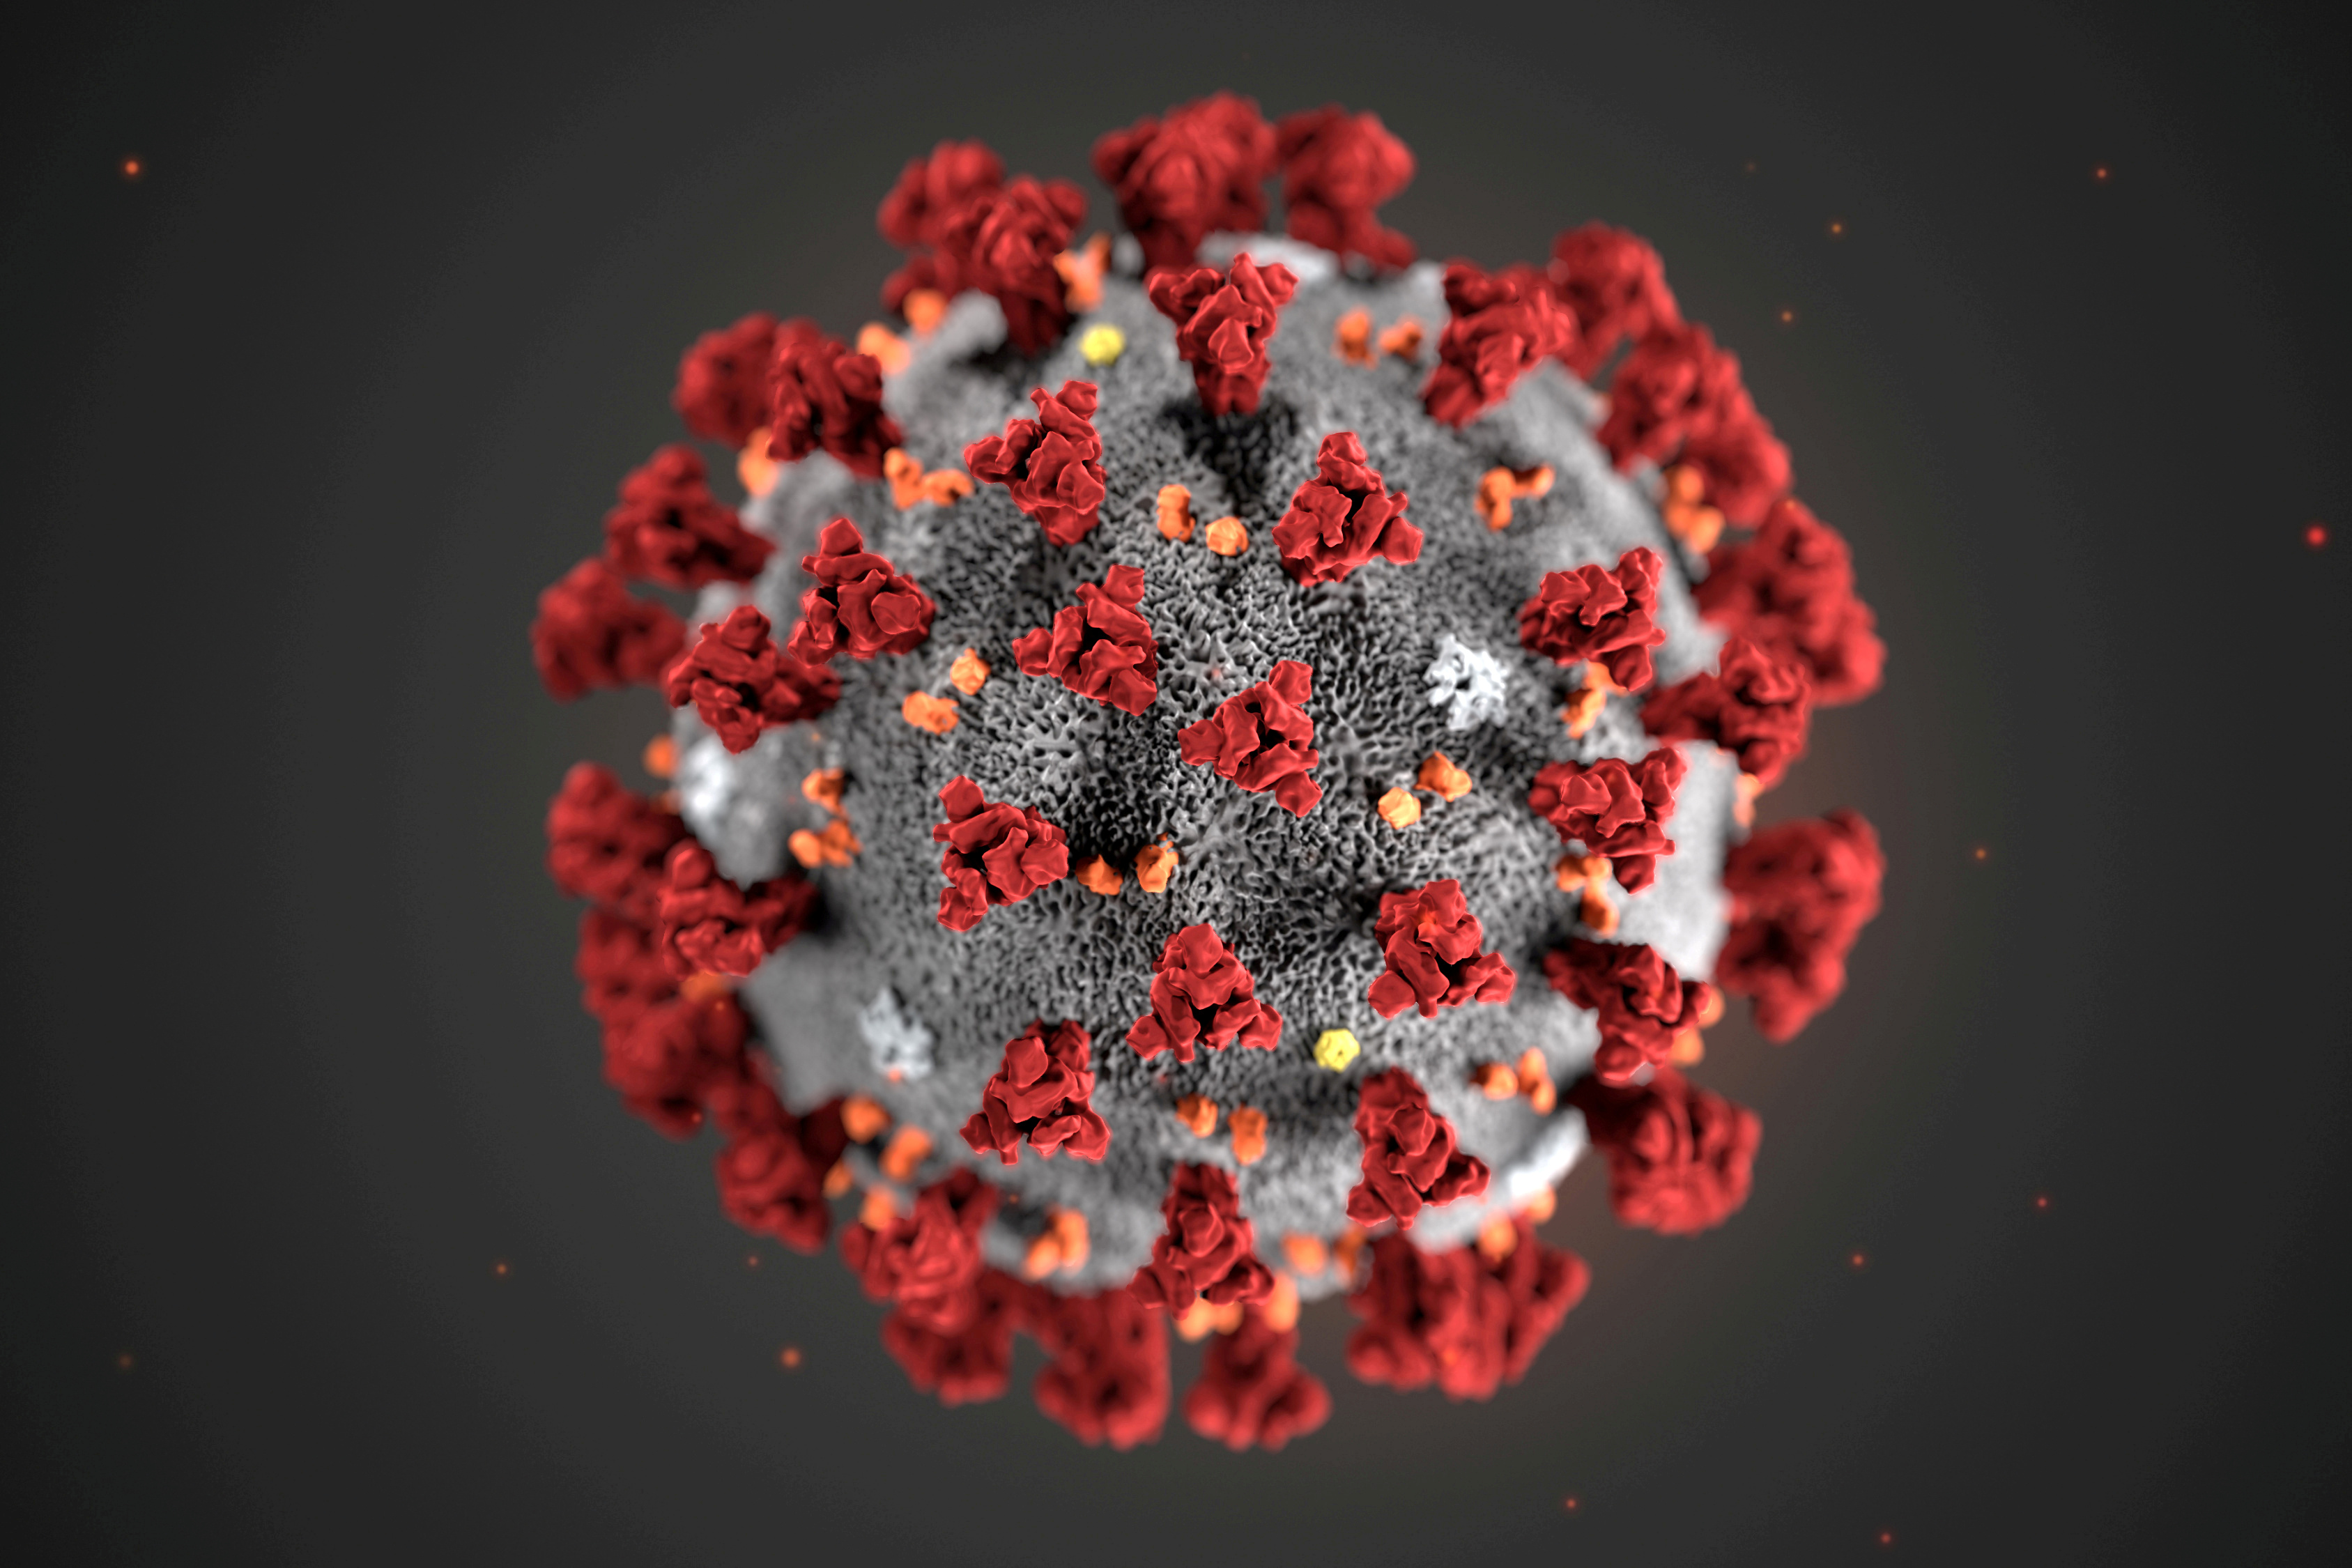 The ultrastructural morphology exhibited by the 2019 Novel Coronavirus (2019-nCoV), which was identified as the cause of an outbreak of respiratory illness first detected in Wuhan, China, is seen in an illustration released by the Centers for Disease Control and Prevention (CDC) in Atlanta, Georgia, U.S. January 29, 2020. Alissa Eckert, MS; Dan Higgins, MAM/CDC/Handout via REUTERS. THIS IMAGE HAS BEEN SUPPLIED BY A THIRD PARTY. THIS IMAGE WAS PROCESSED BY REUTERS TO ENHANCE QUALITY, AN UNPROCESSED VERSION HAS BEEN PROVIDED SEPARATELY.MANDATORY CREDIT